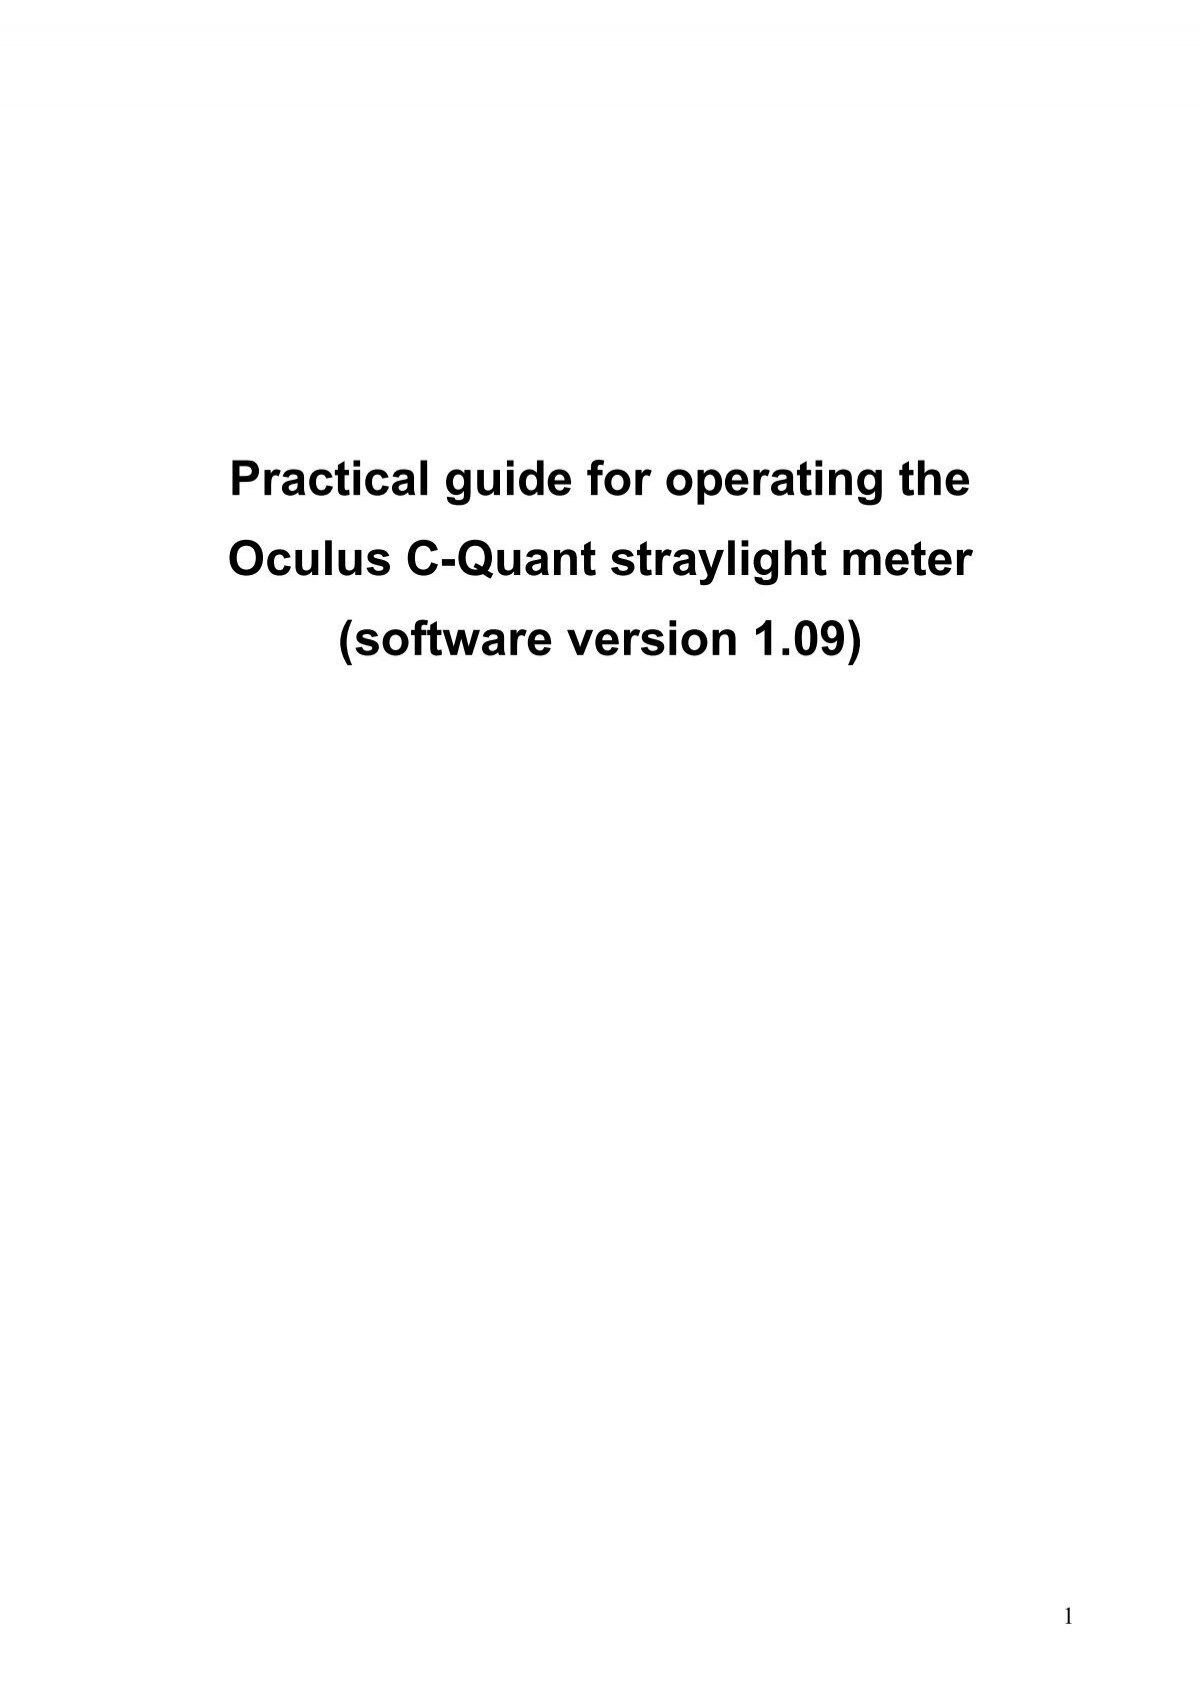 Practical guide for operating the Oculus C-Quant straylight meter - Nin